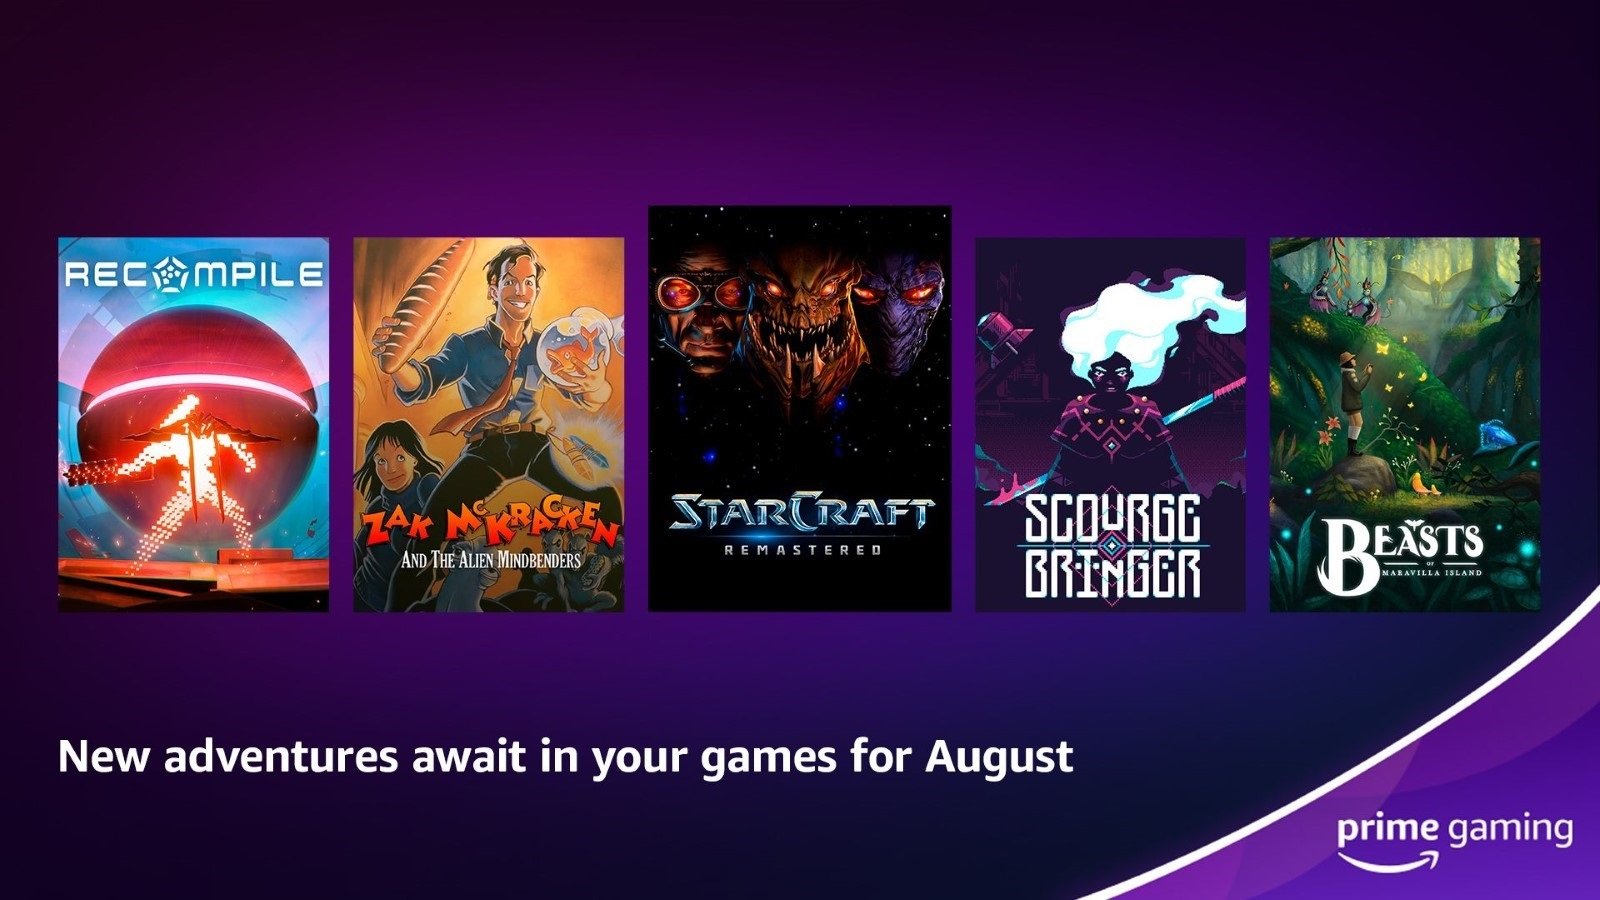 Prime Gaming reveals 8 free games to download in August 2023